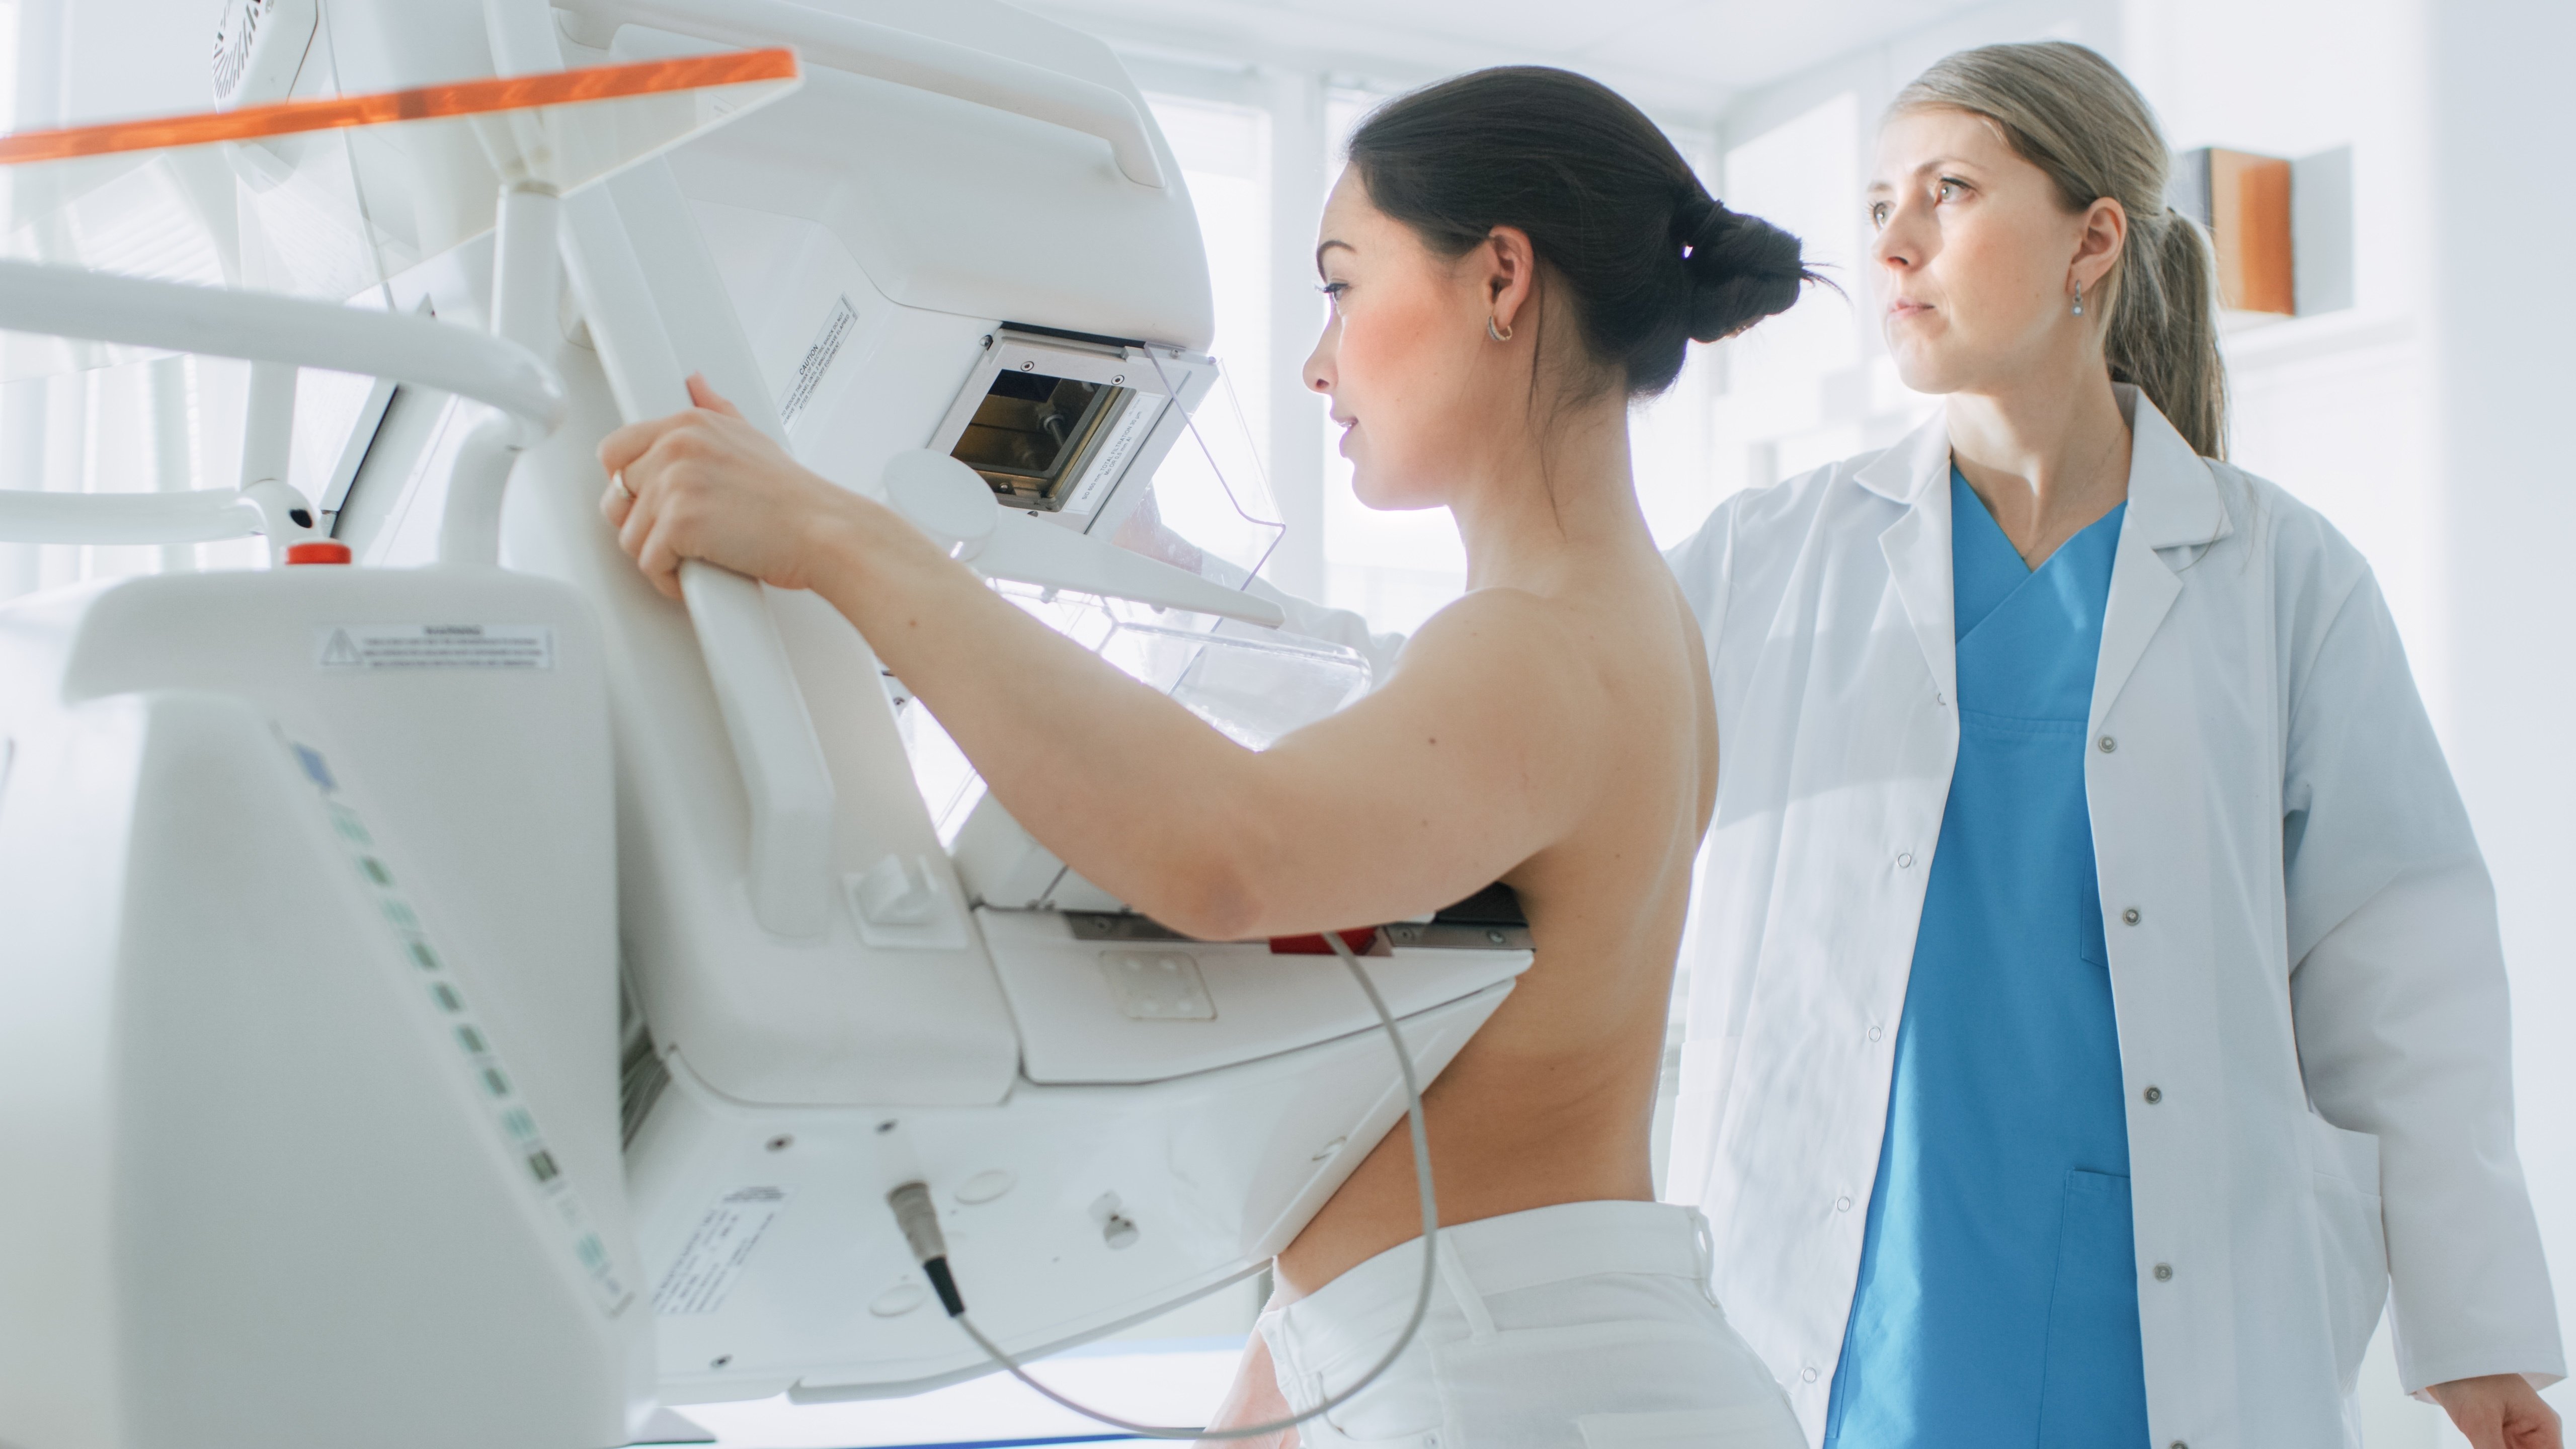 Mammograms can detect Breast Cancer early